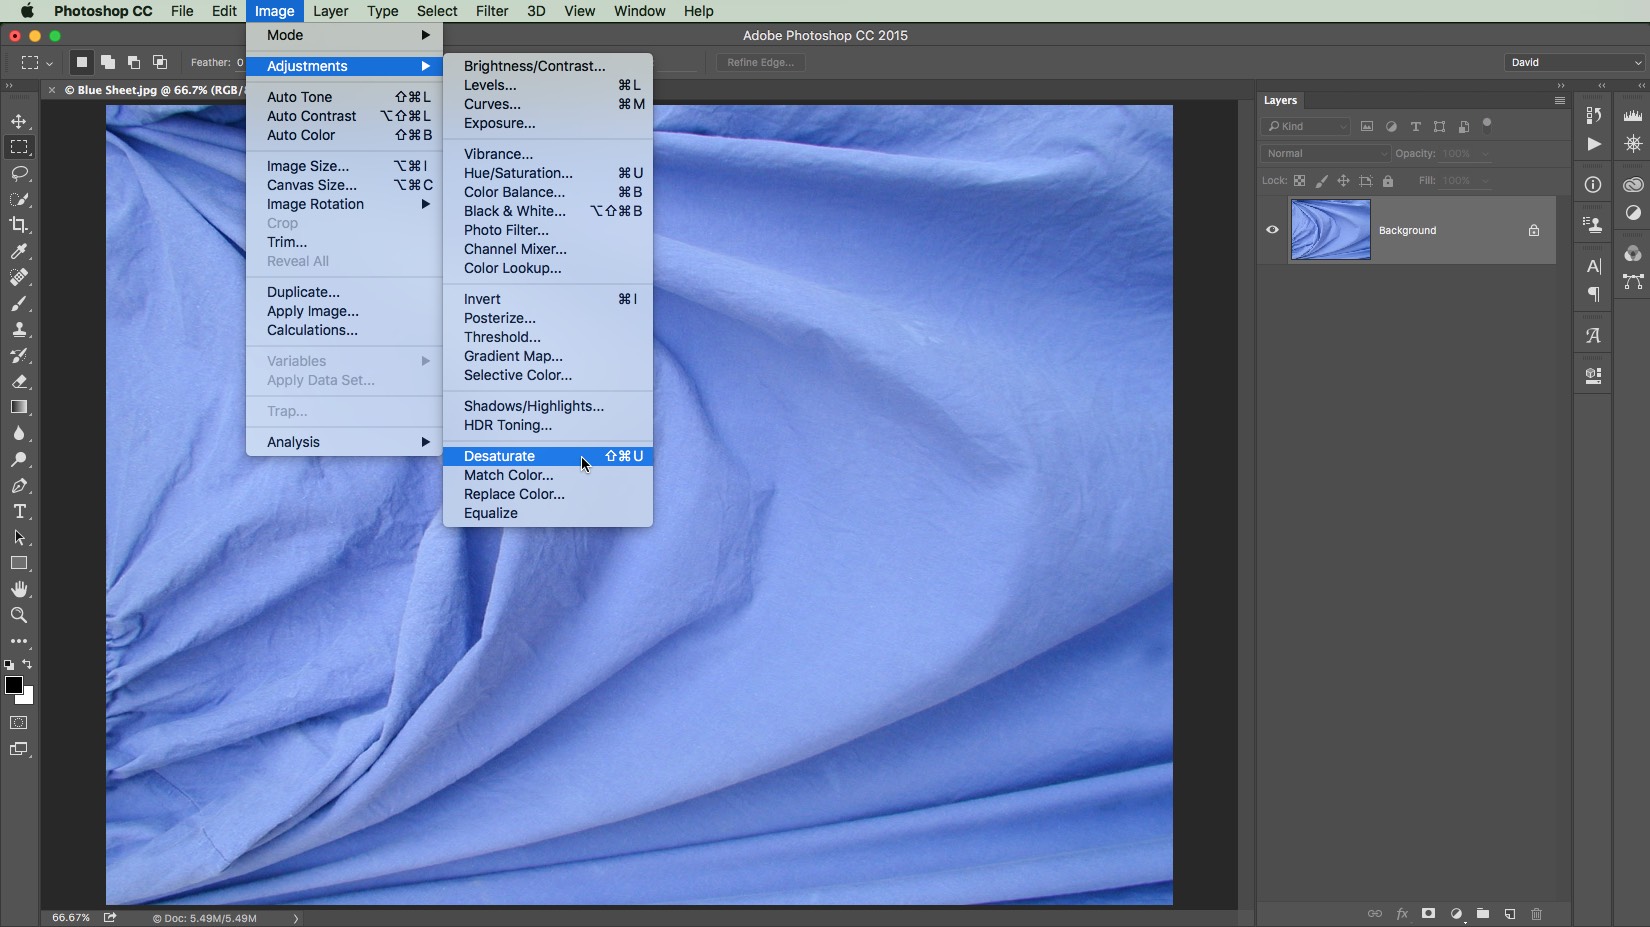 How To Create A Rippling Flag Using The Displace Filter In Adobe Photoshop  - TipSquirrel